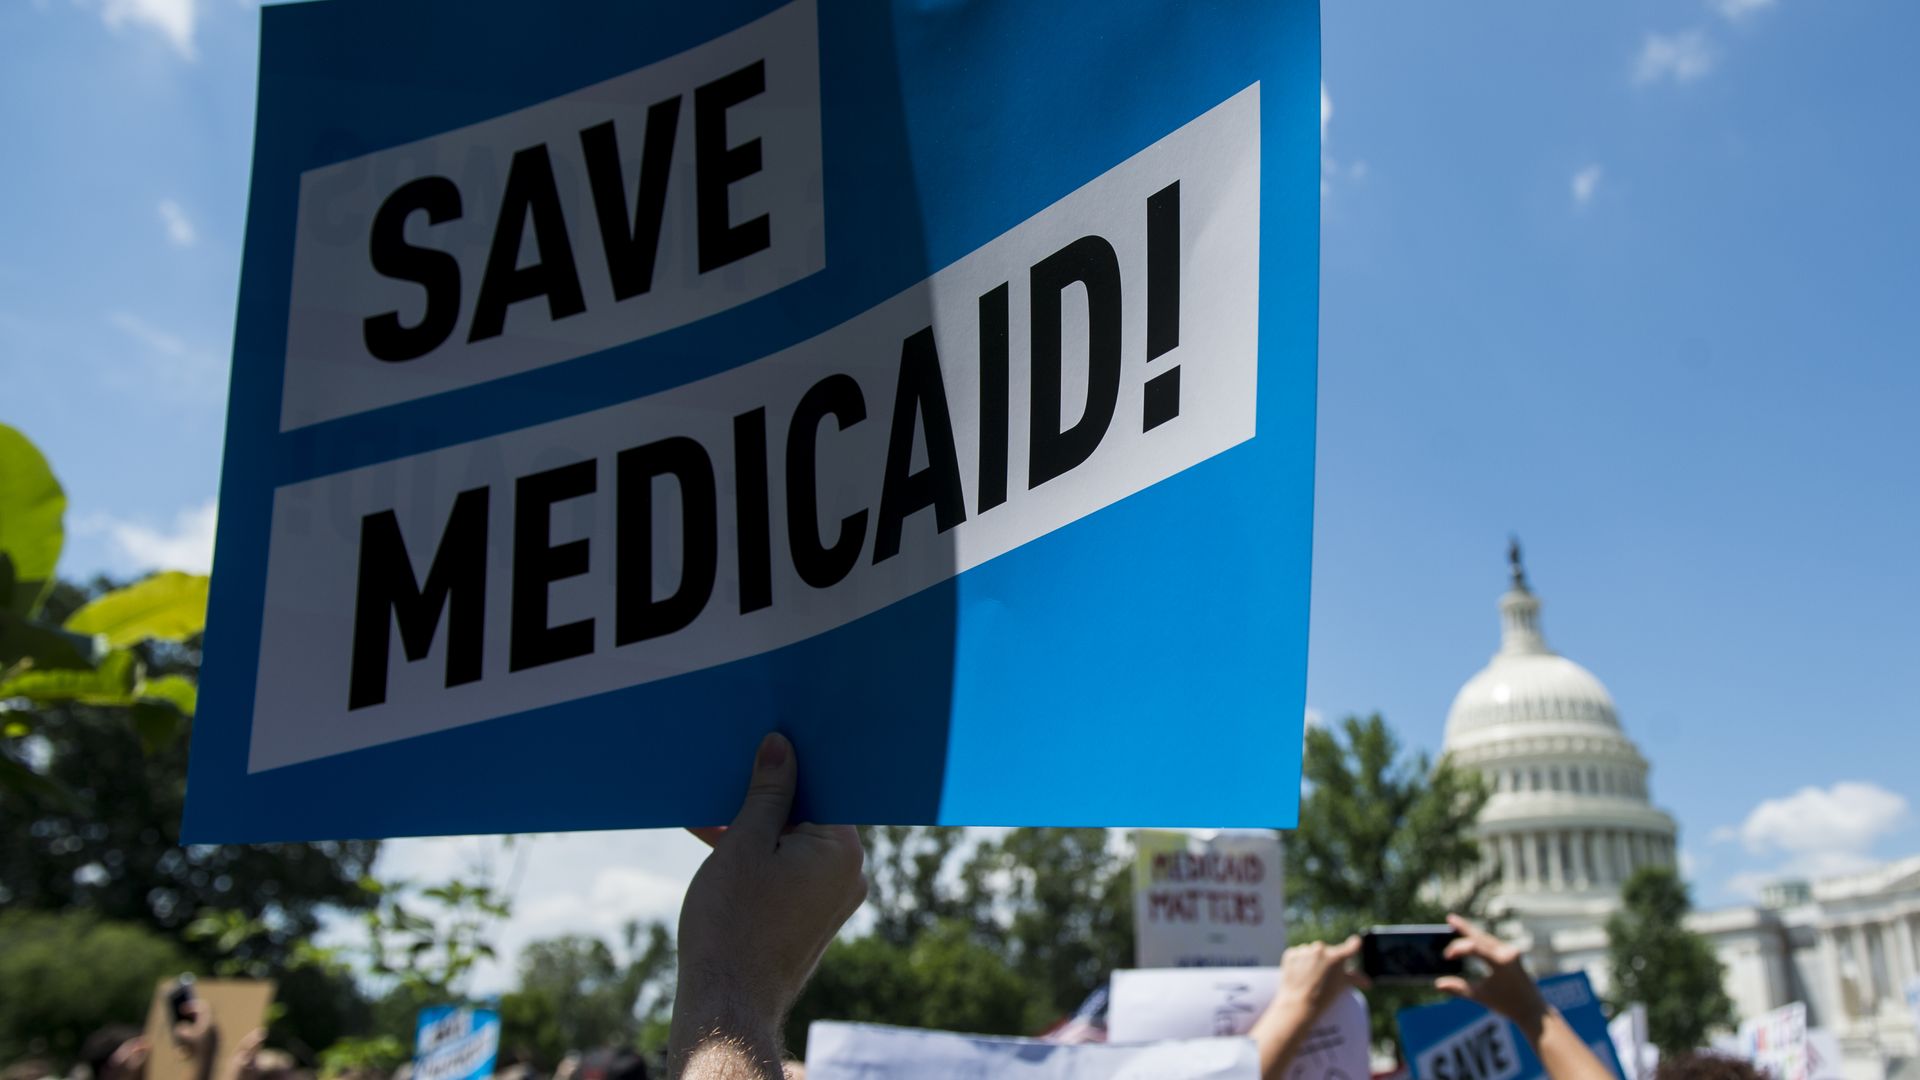 A person holds up a sign that says "Save Medicaid!"